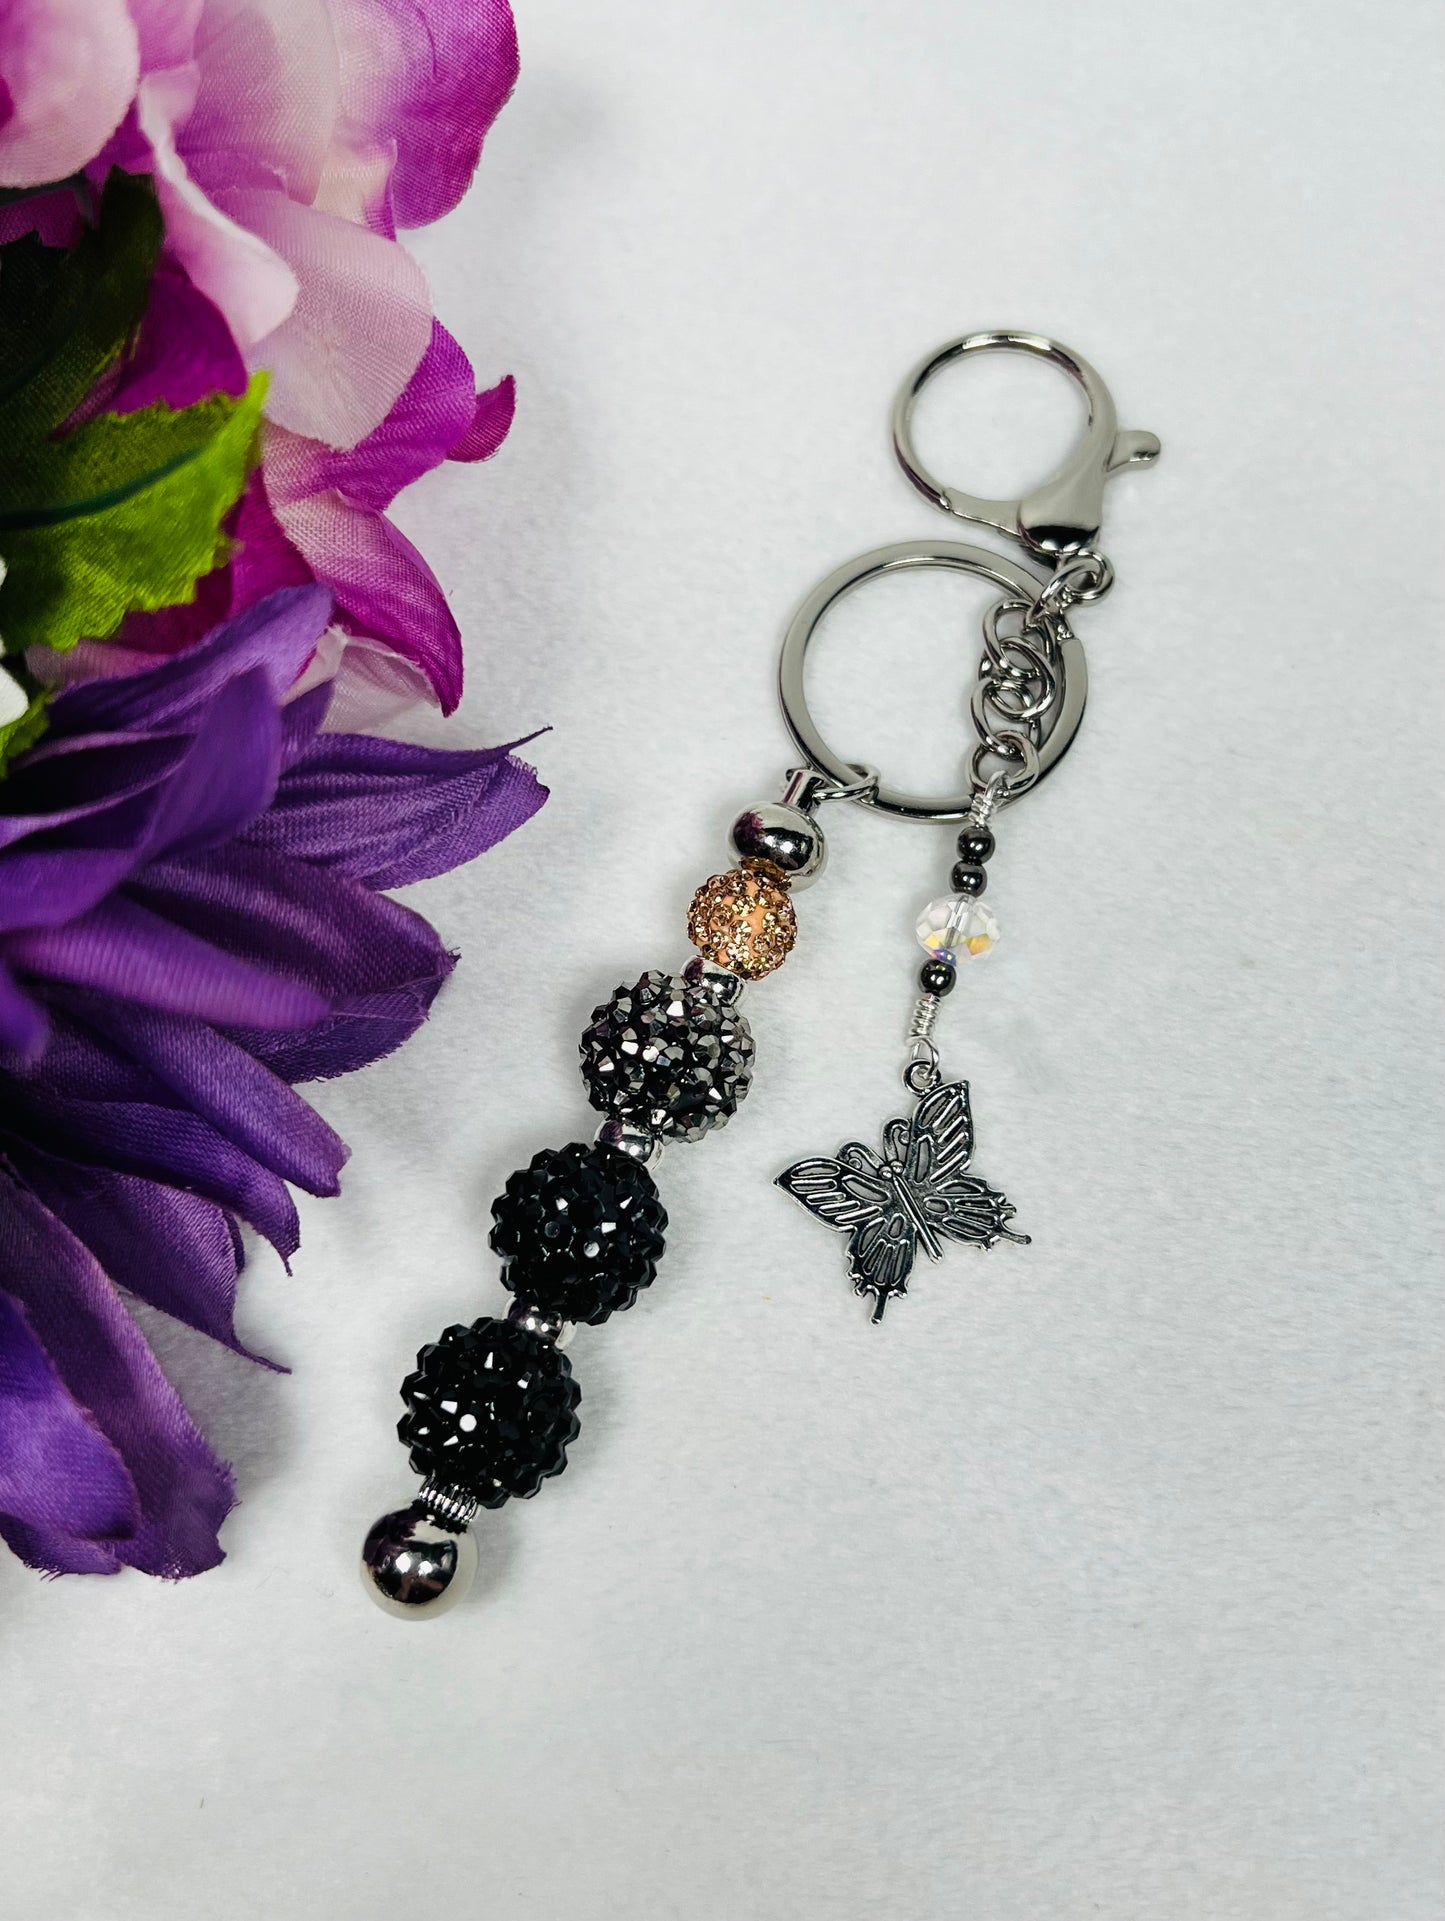 Black Key-fob with Butterfly Keychain